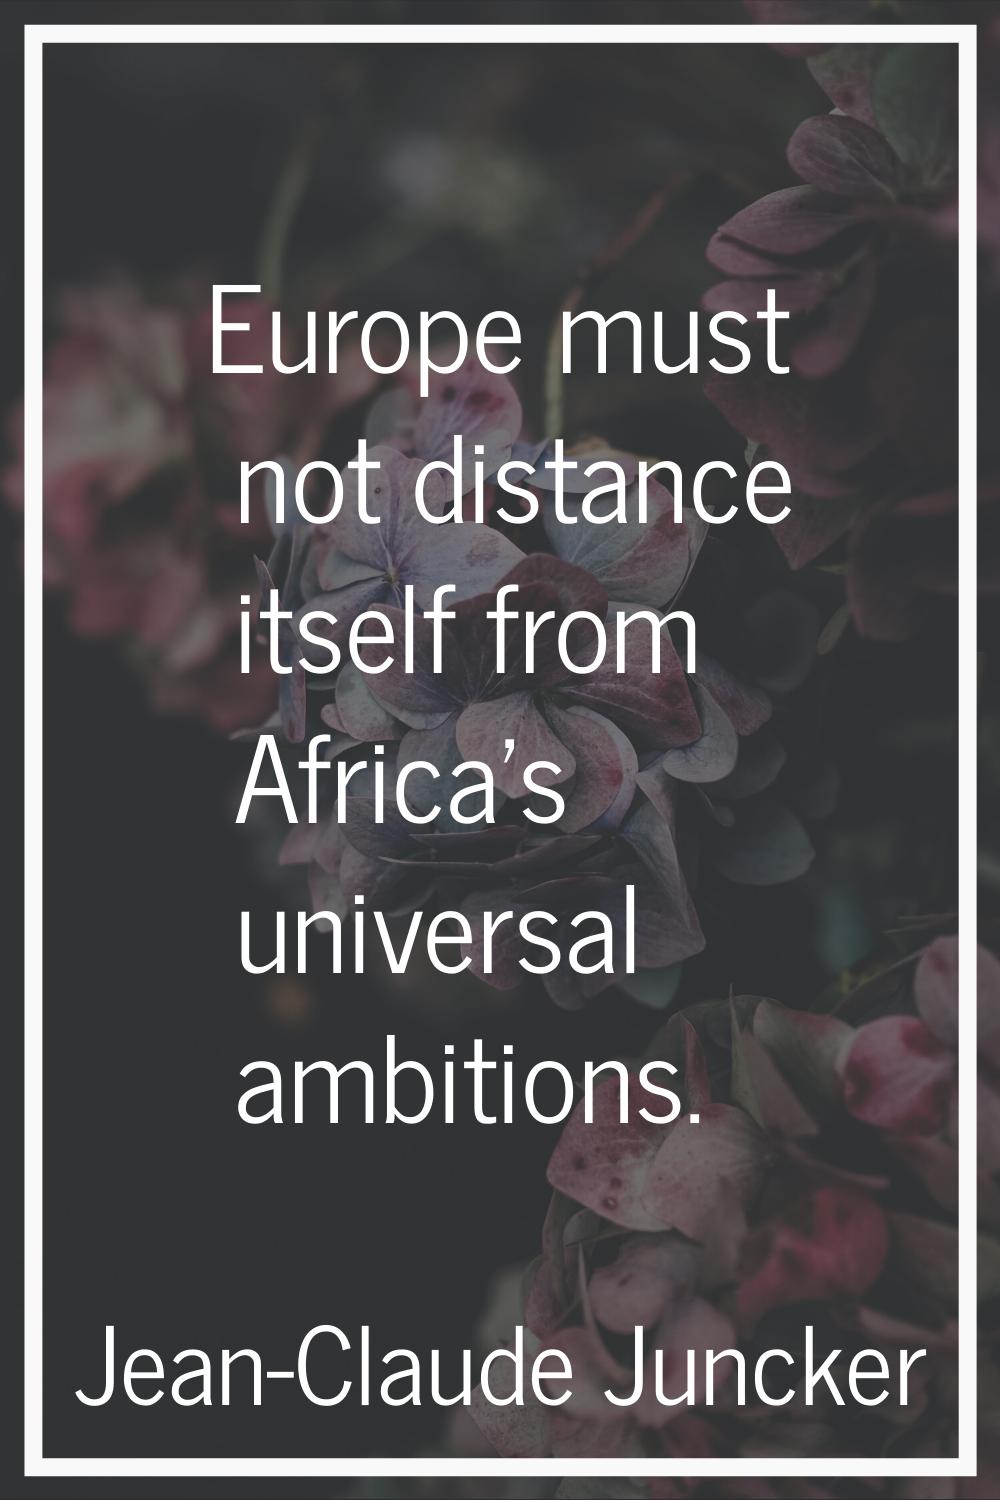 Europe must not distance itself from Africa's universal ambitions.